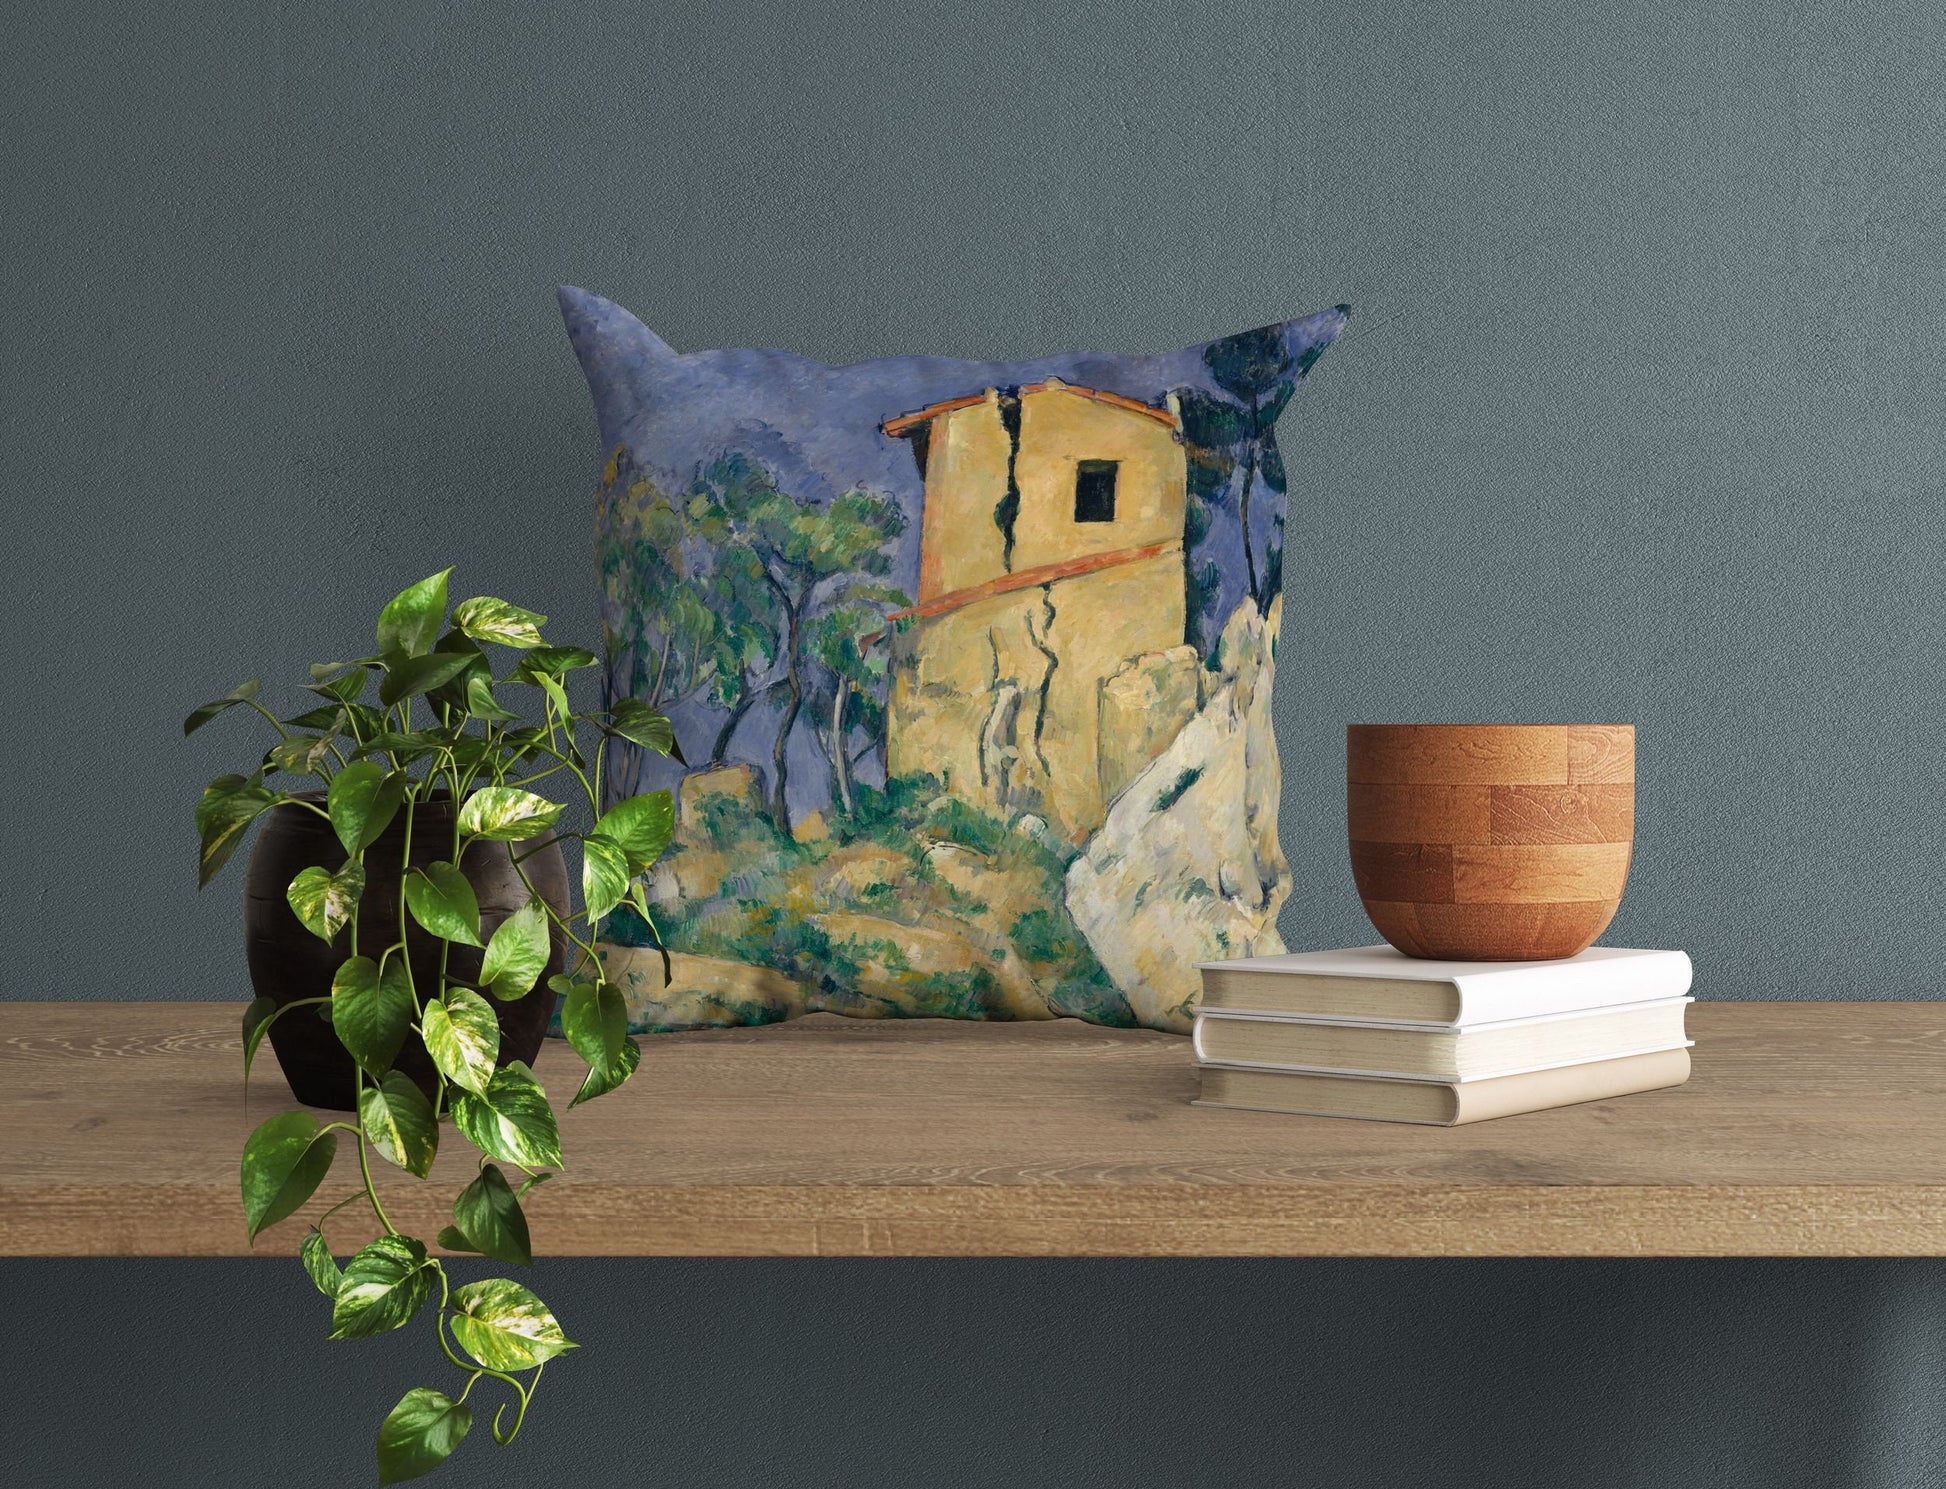 Paul Cezanne Famous Painting, Toss Pillow, Abstract Pillow, Artist Pillow, Blue And Yellow, Post-Impressionist Art, Square Pillow